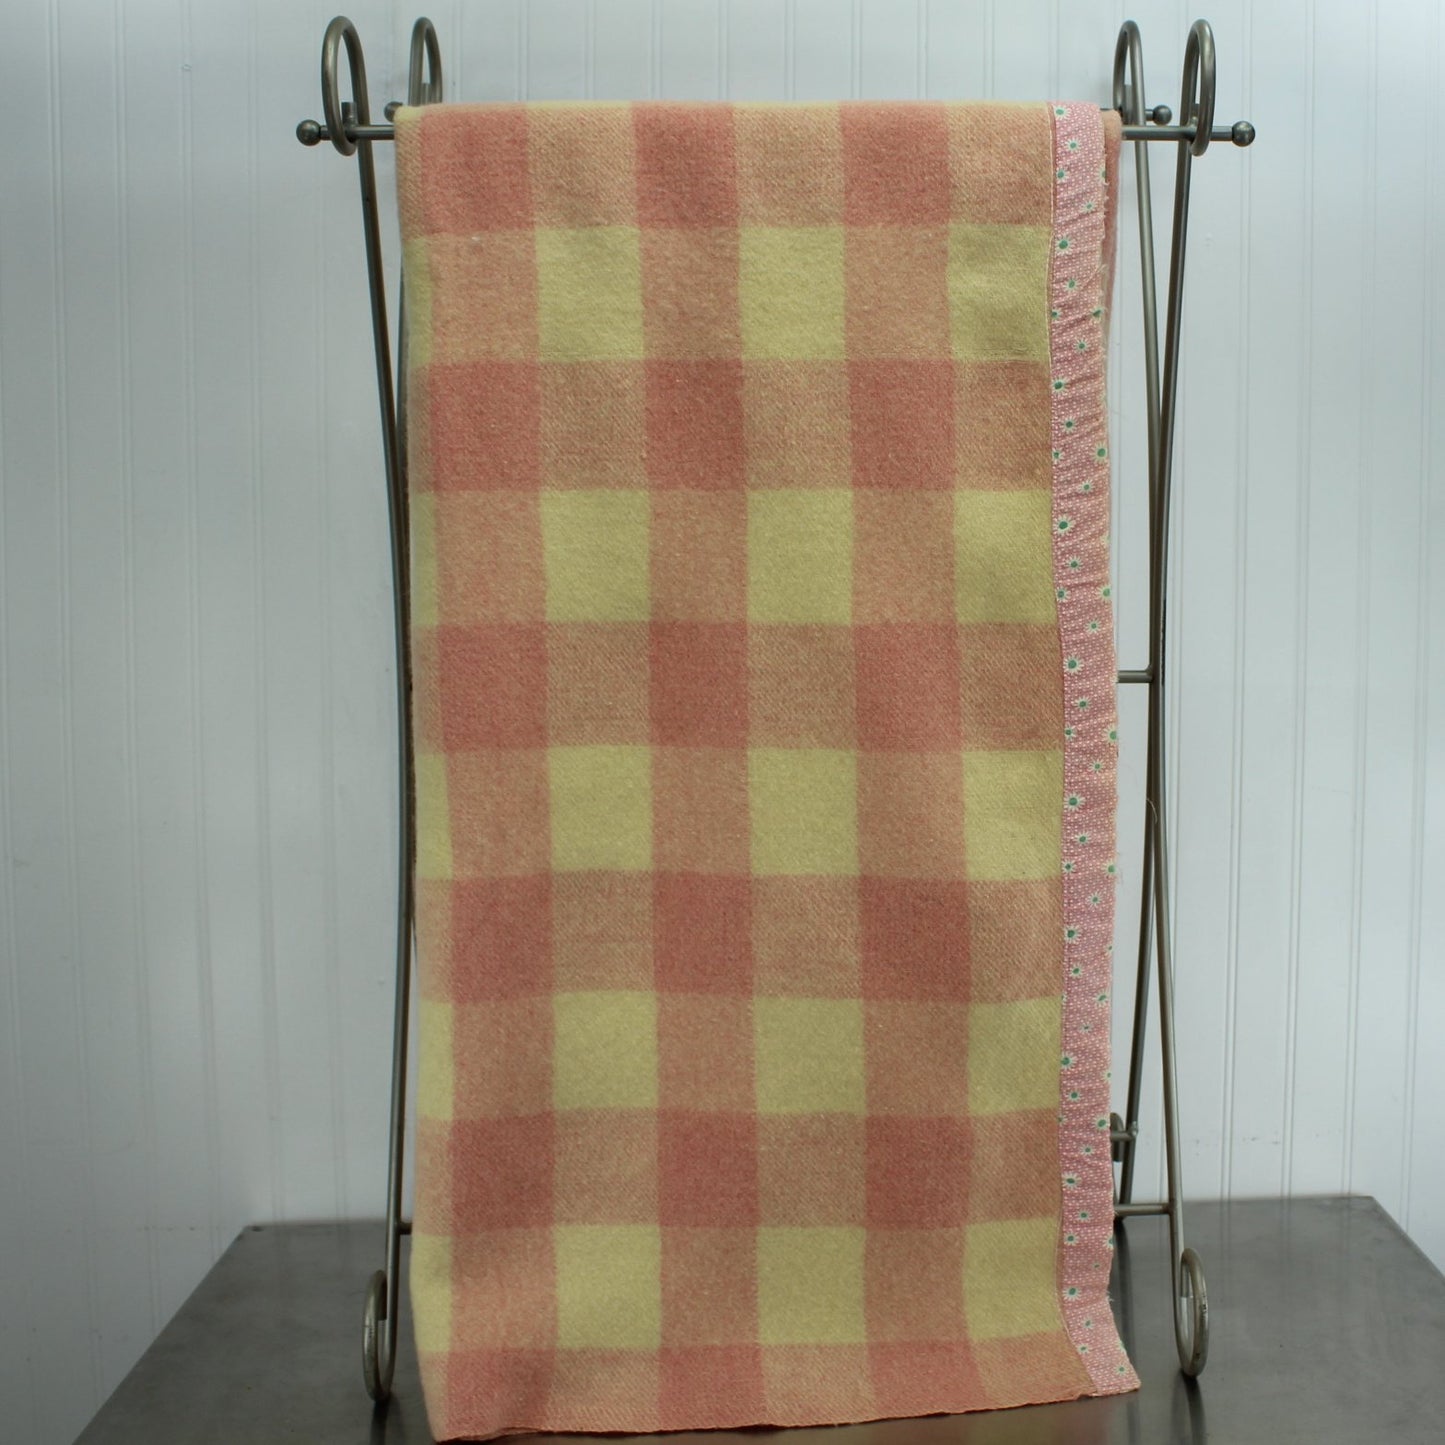 Small Wool Blanket Cream Pink Big Checks Late 1940s Use or Cutter DIY side view of blanket and binding